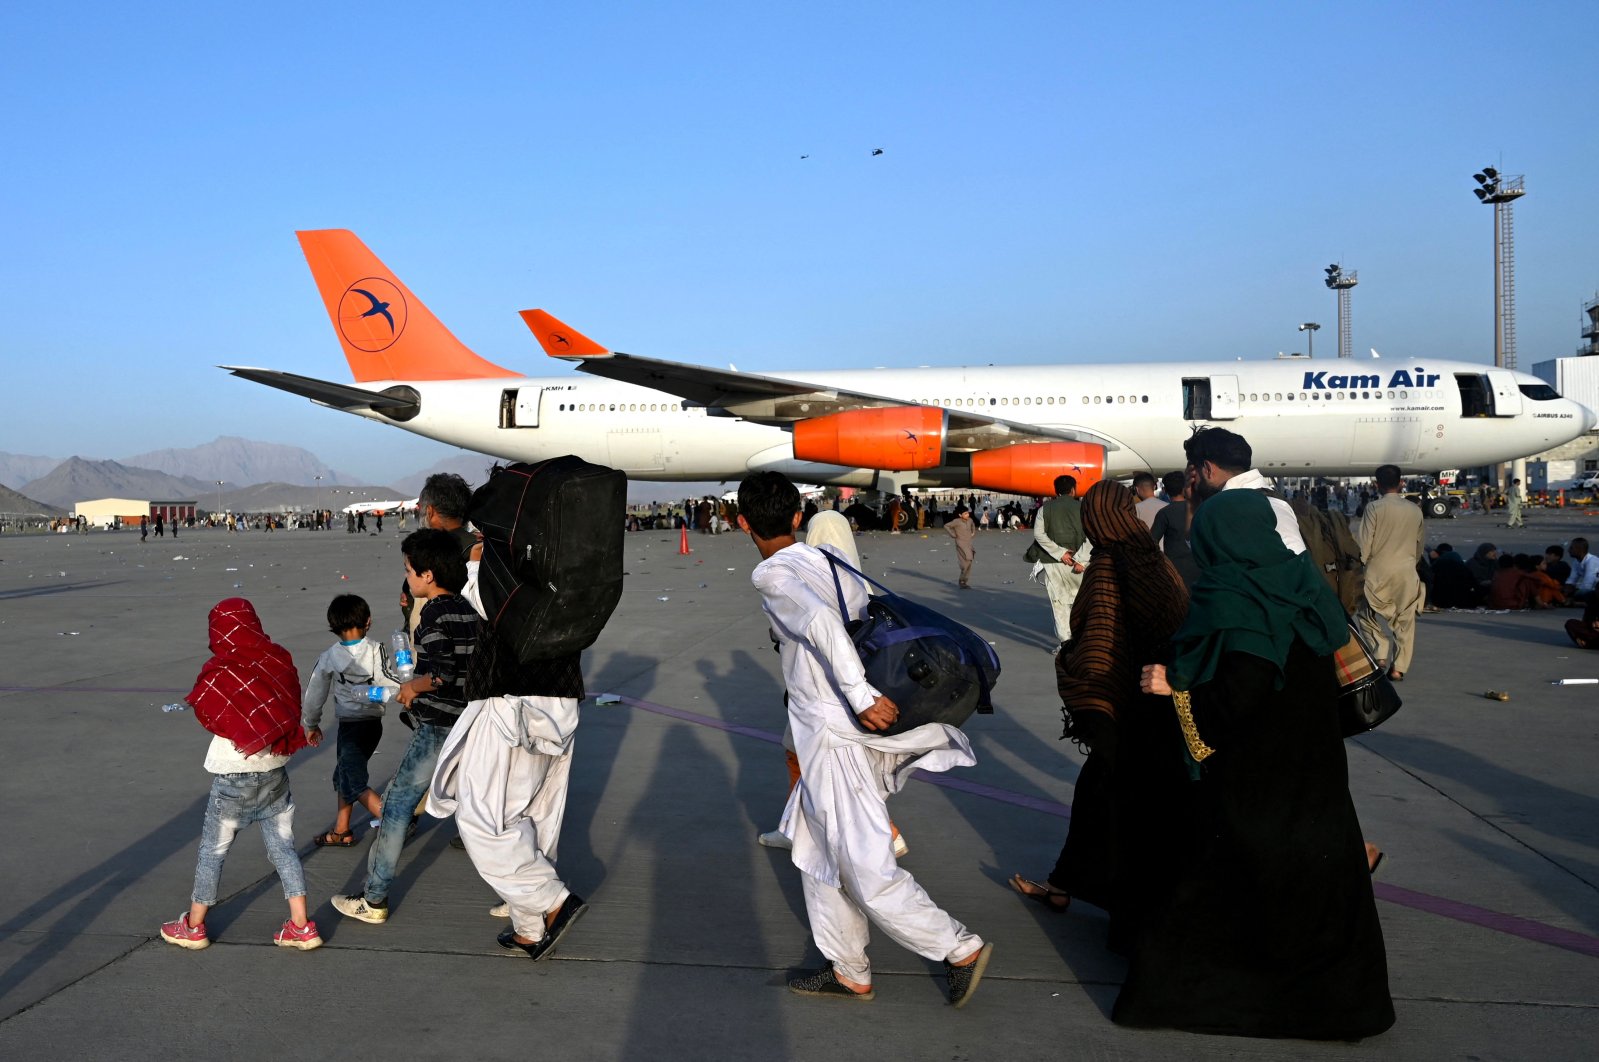 Afghan families walk by the aircraft at the Kabul airport in Kabul, Afghanistan, Aug.16, 2021. (AFP Photo)